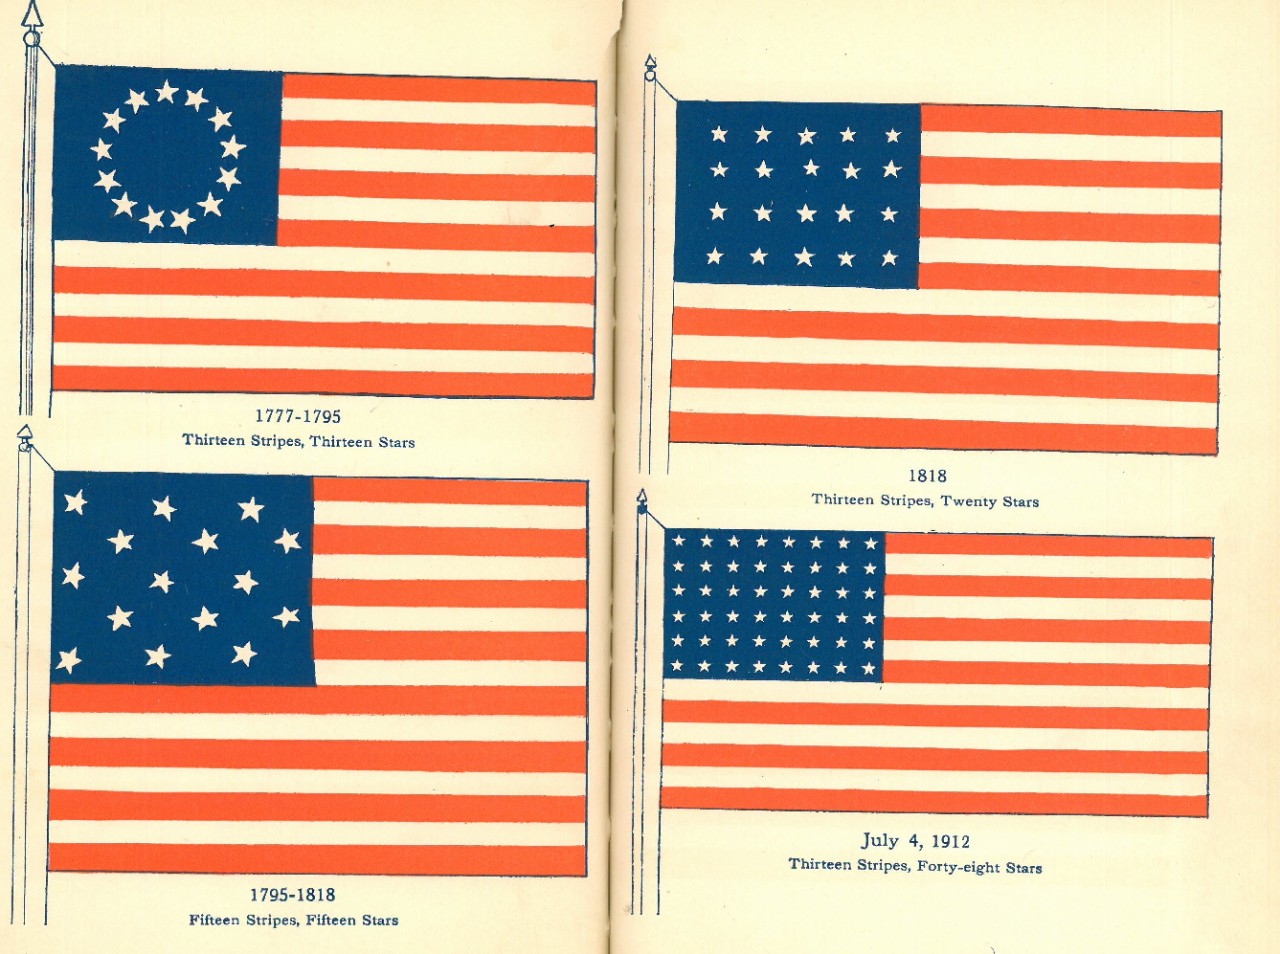 Illustration of early American Flags 1777 - 1912